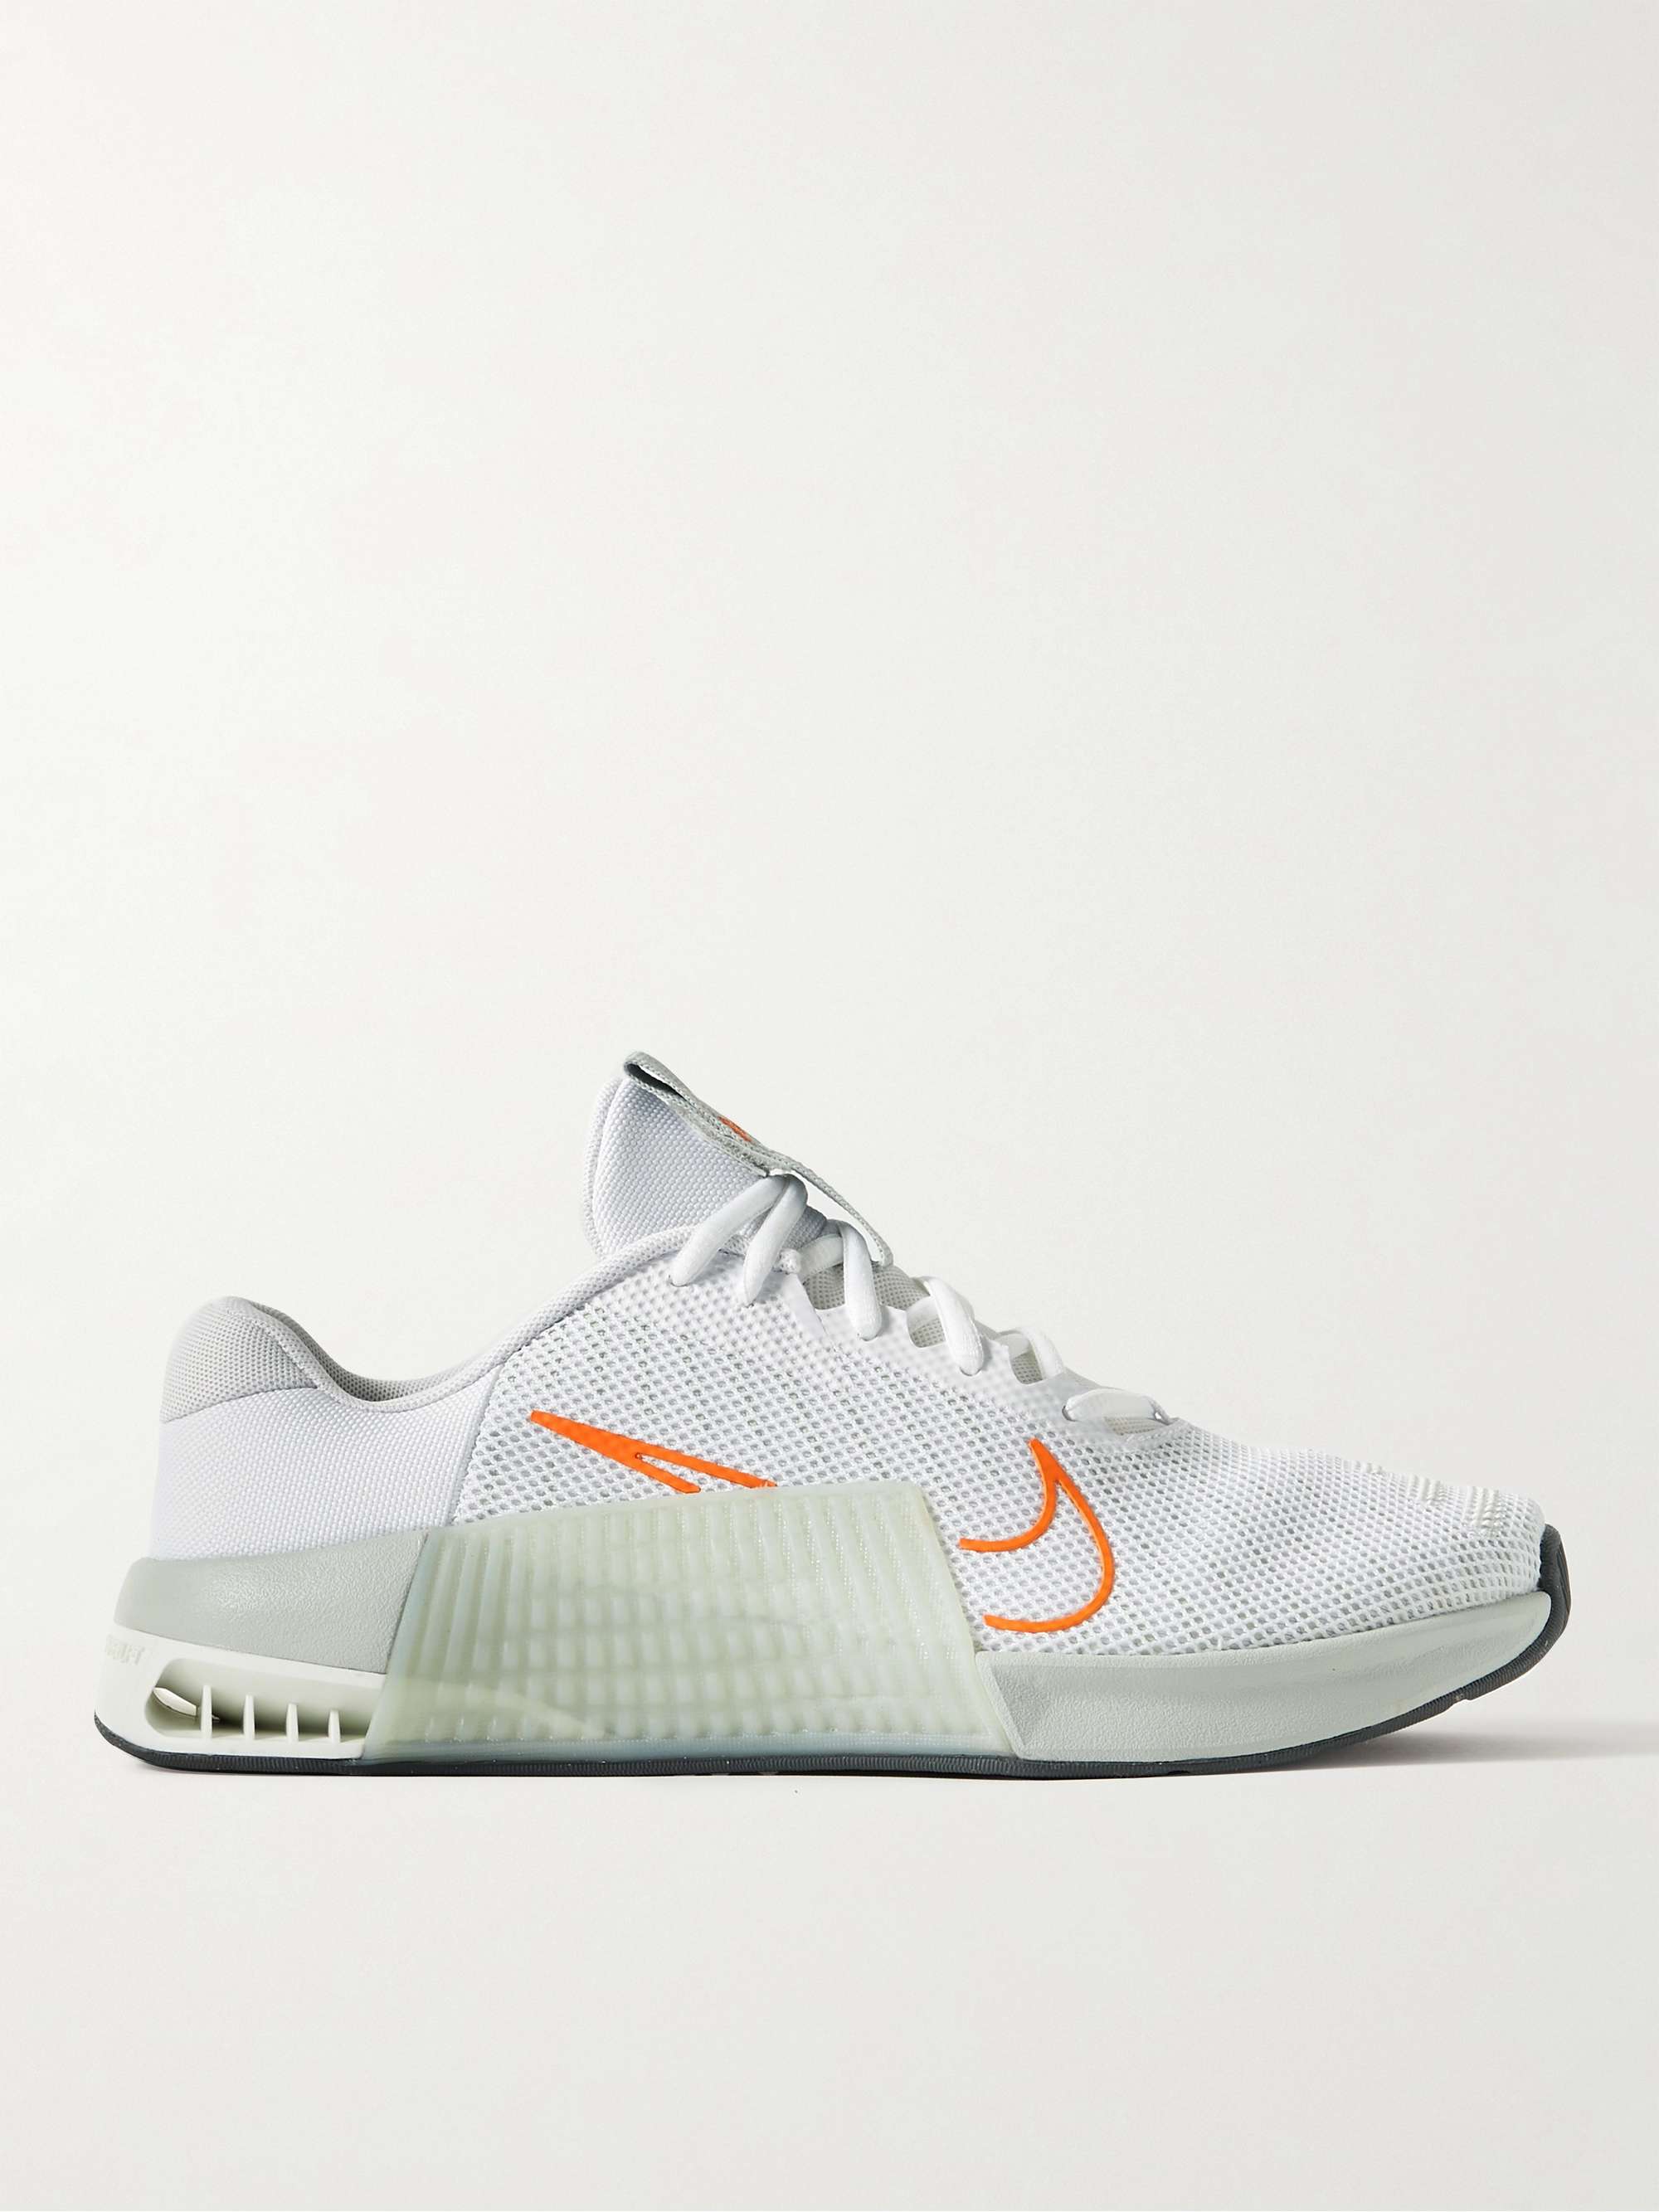 NIKE TRAINING Metcon 9 Rubber-Trimmed Mesh Sneakers for Men